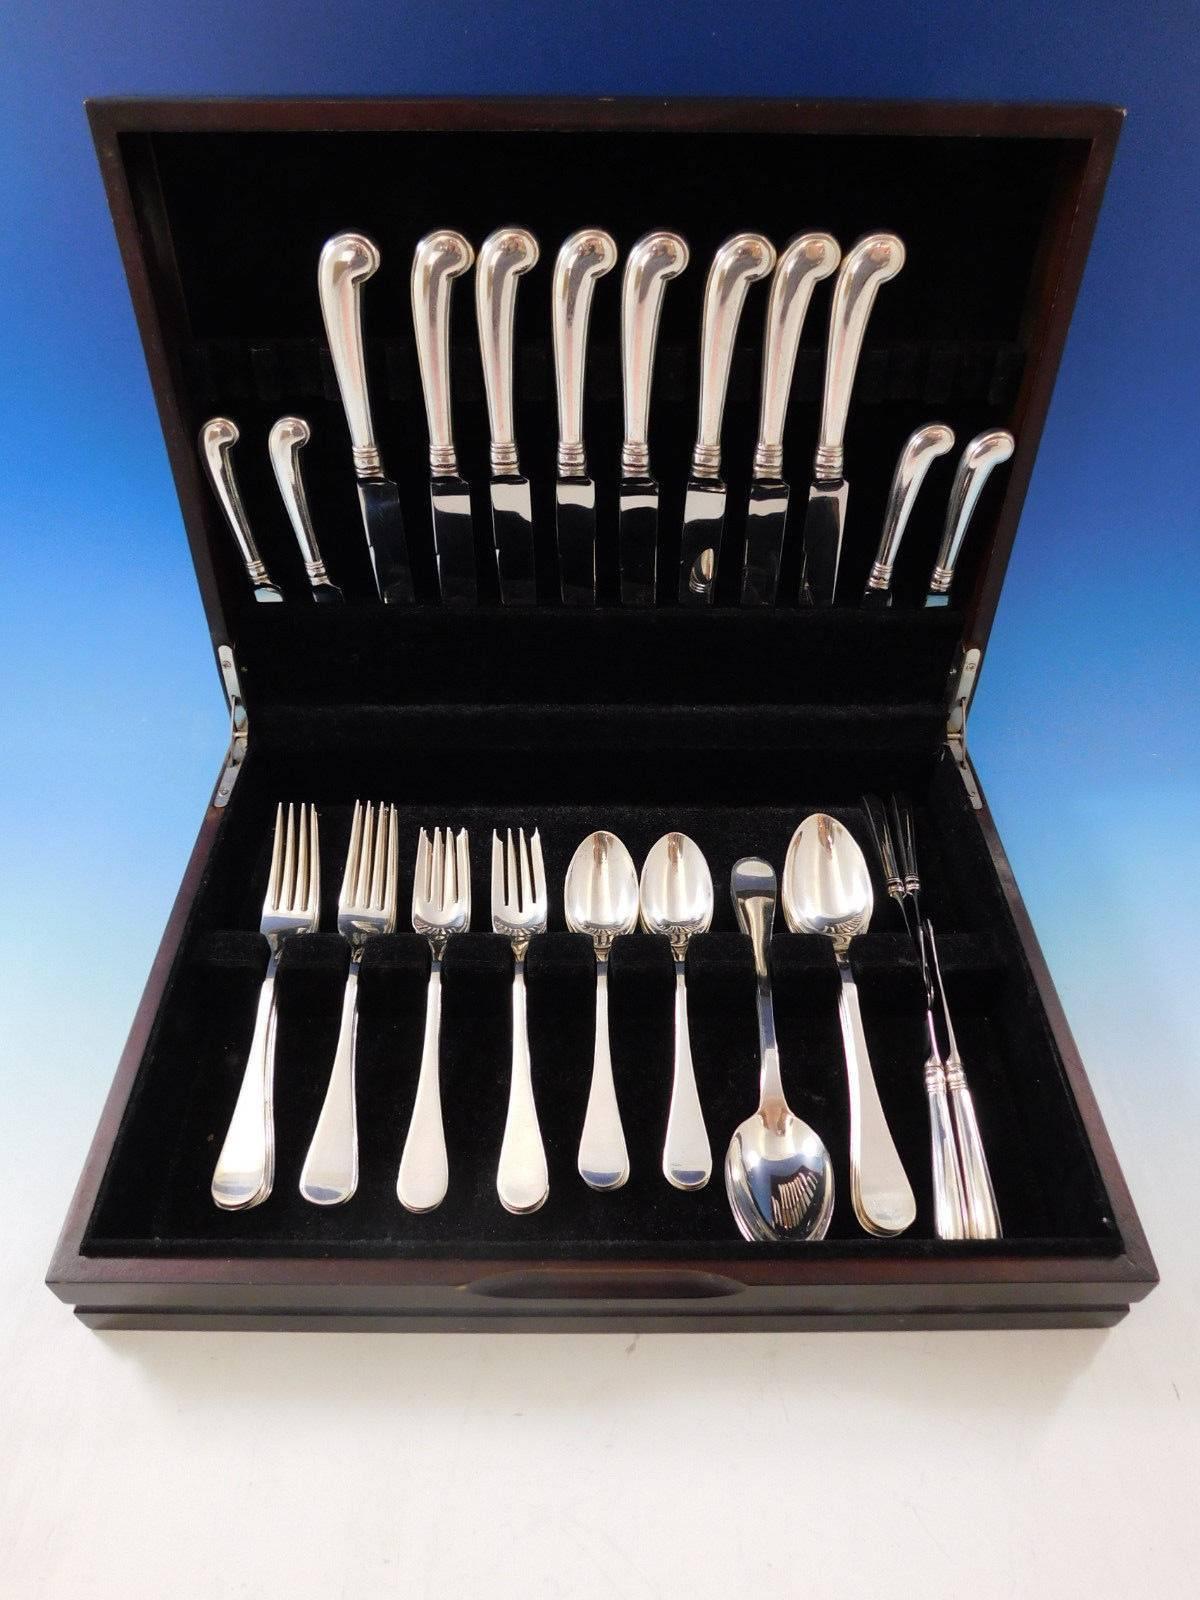 King William by Tiffany & Co Sterling silver Flatware set, 48 pieces. This set includes:

8 Knives, 8 7/8